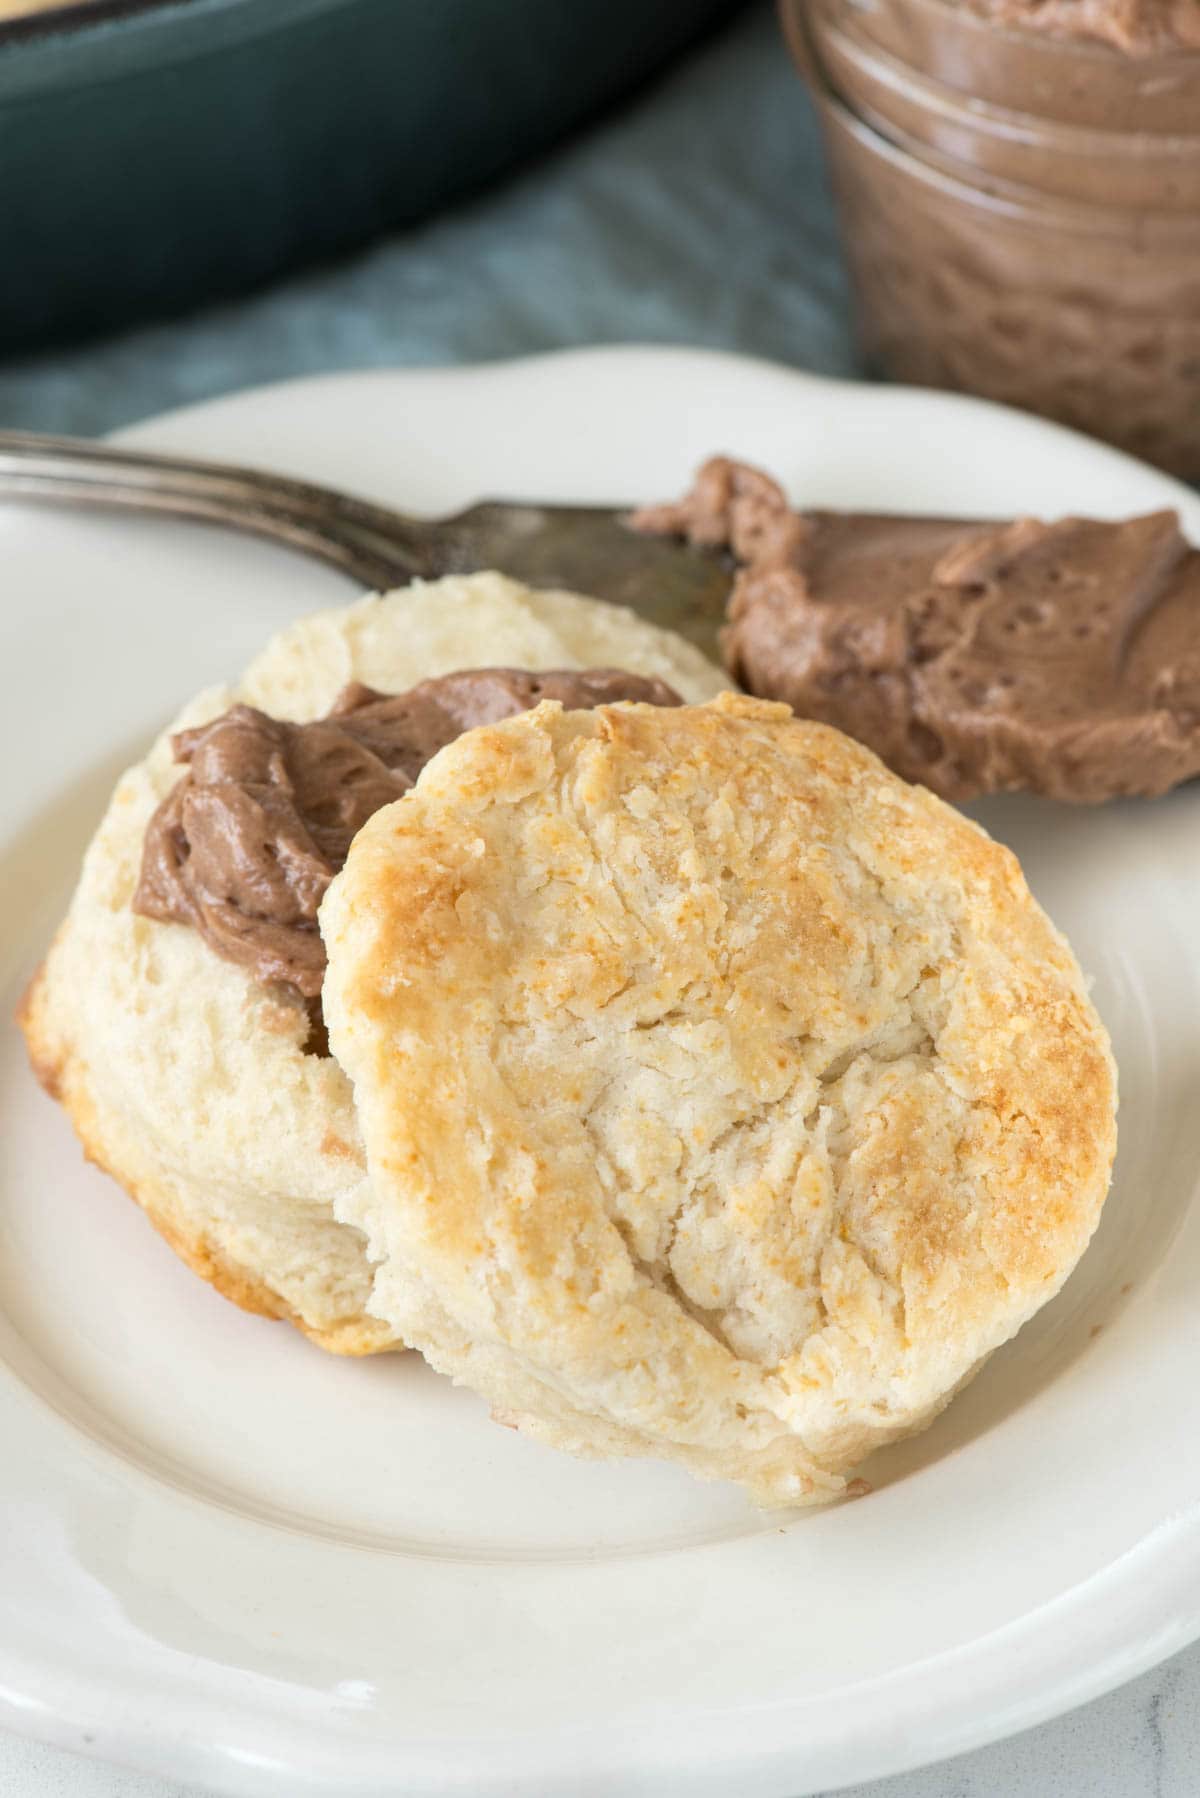 These are THE BEST Southern Style Buttermilk Biscuits, especially with Chocolate Honey Butter! This recipe is a keeper.